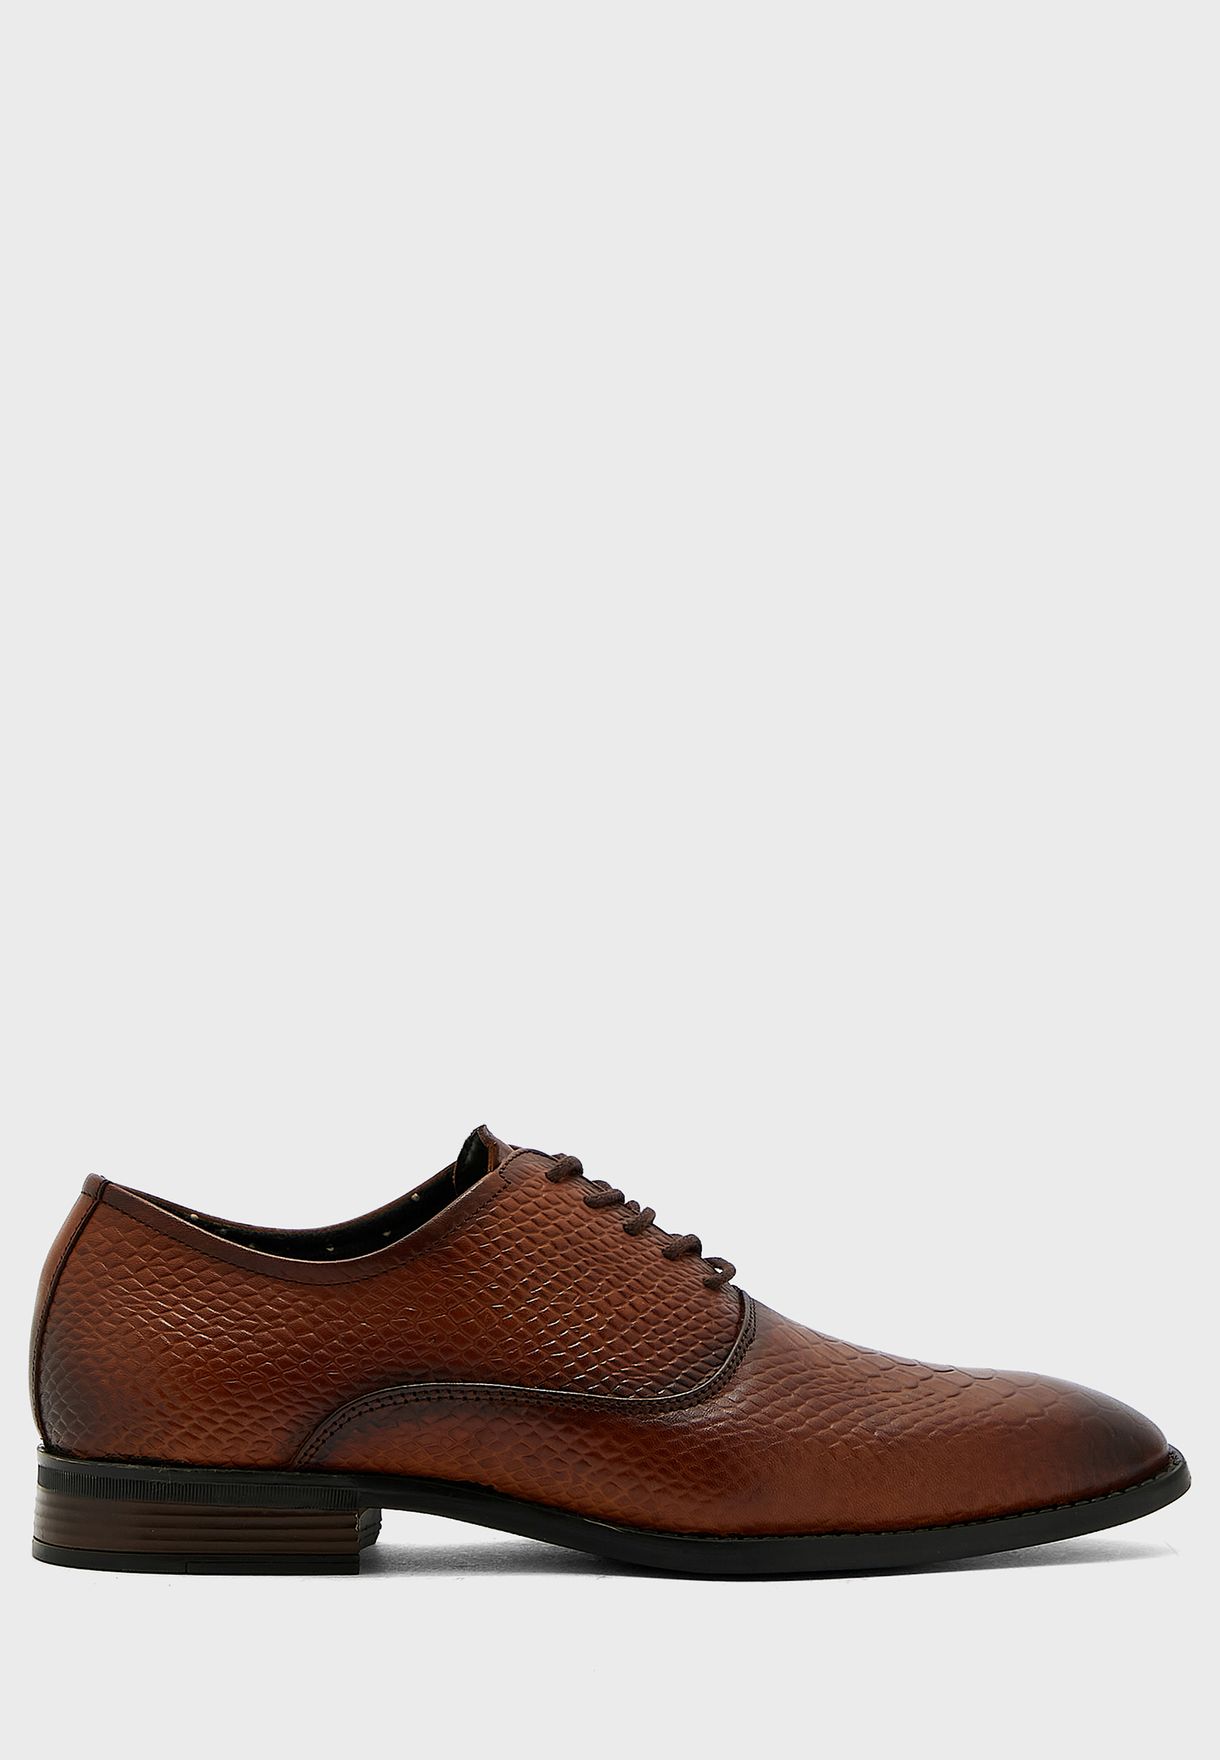 Genuine Leather Snake Print Formal Lace Ups